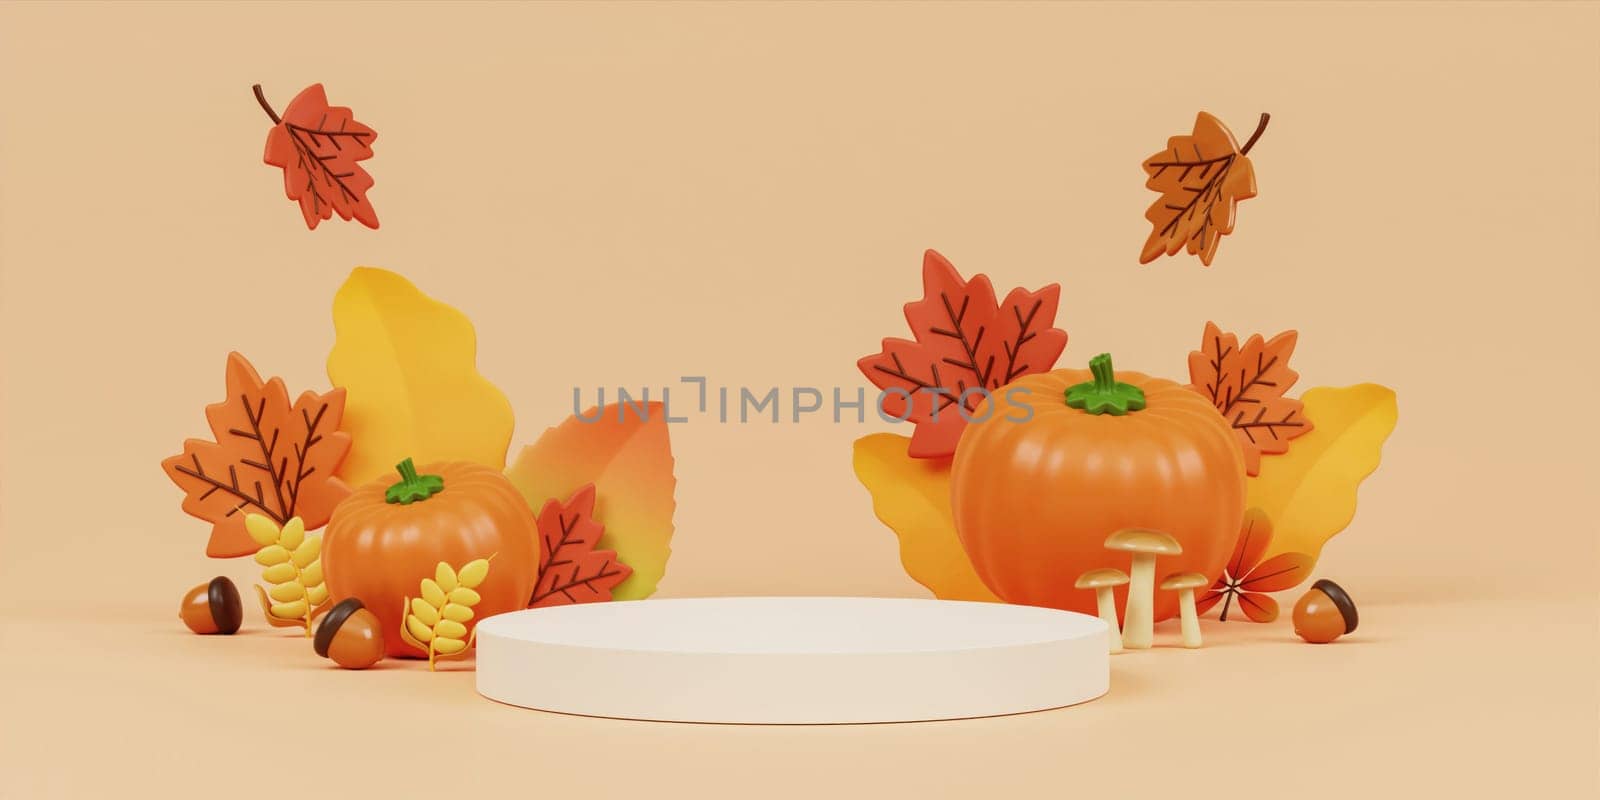 Autumn Display Podium Decoration Background with Autumn leaves and empty minimal podium pedestal product display. 3d render illustration. by meepiangraphic